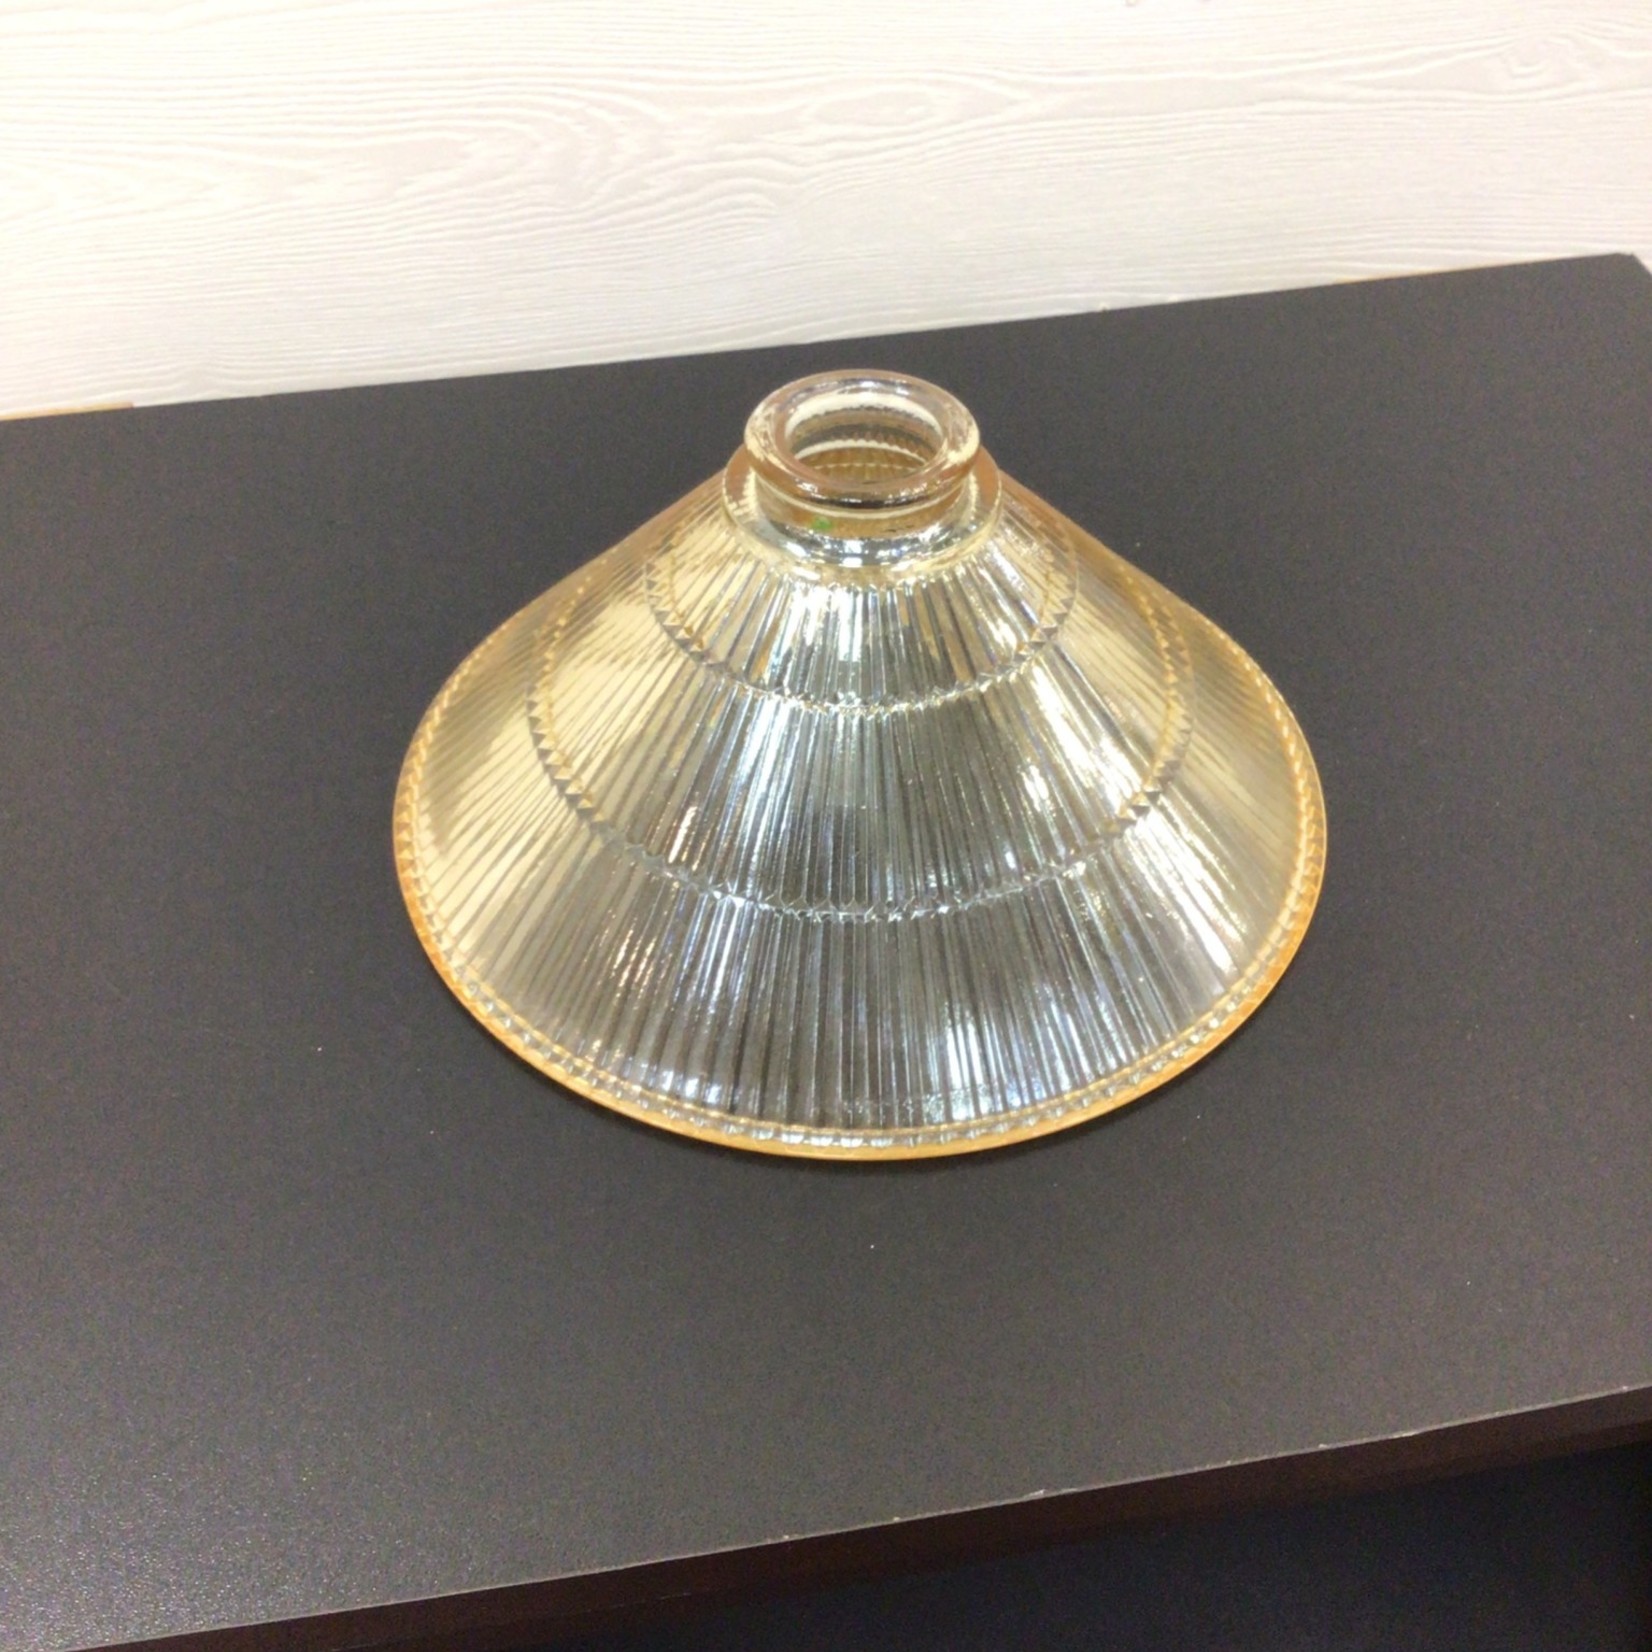 Cone Shaped Light Shade With Golden Tint